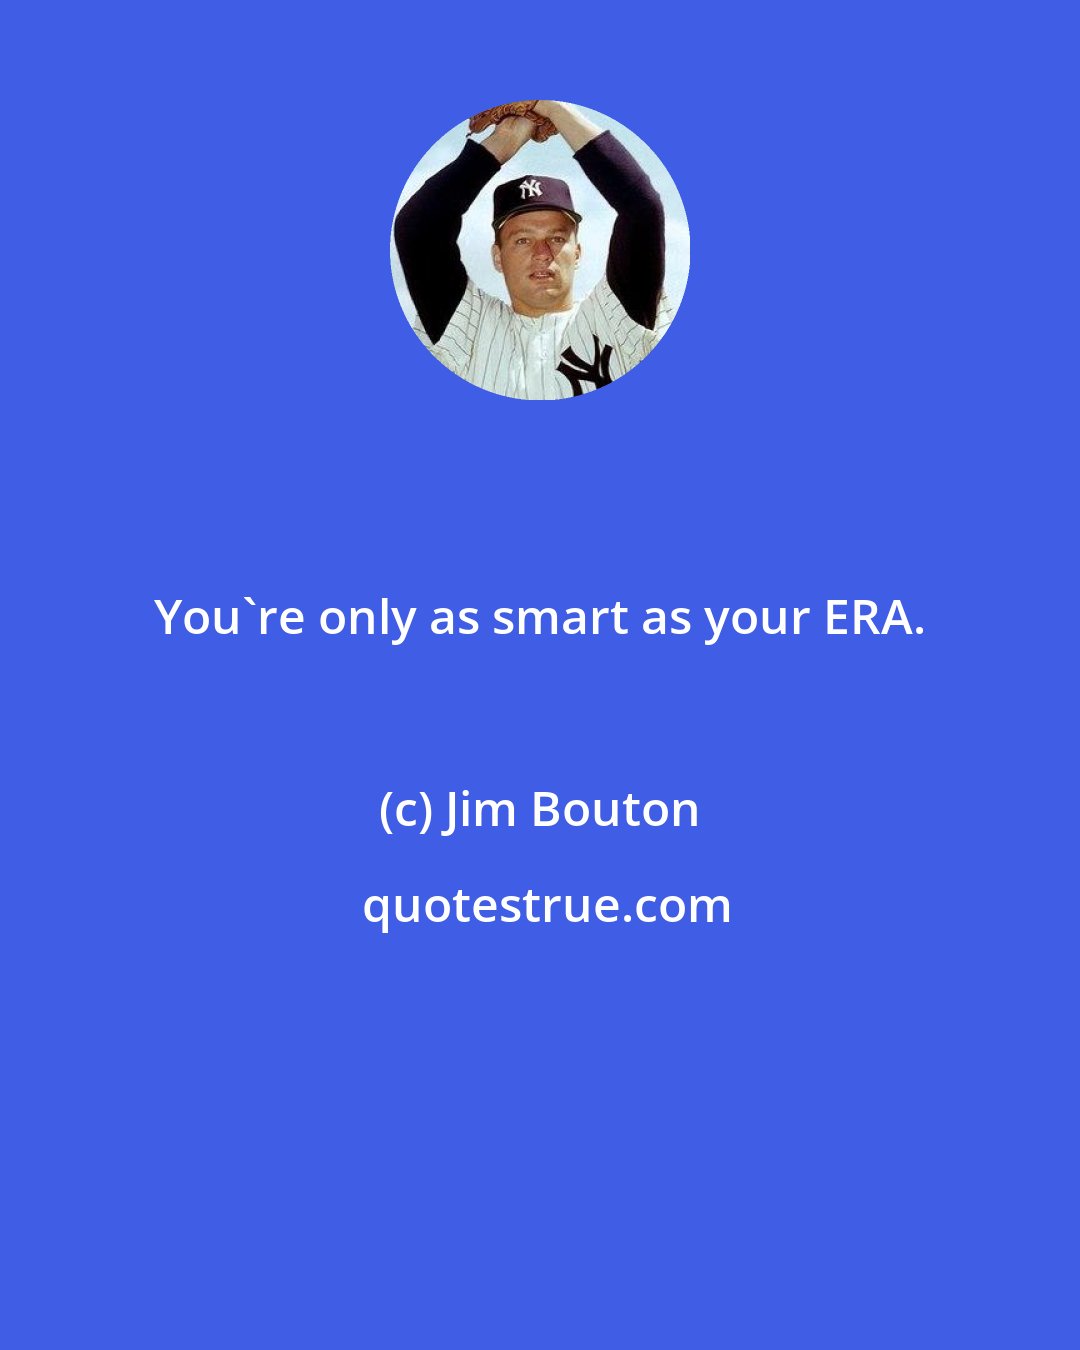 Jim Bouton: You're only as smart as your ERA.